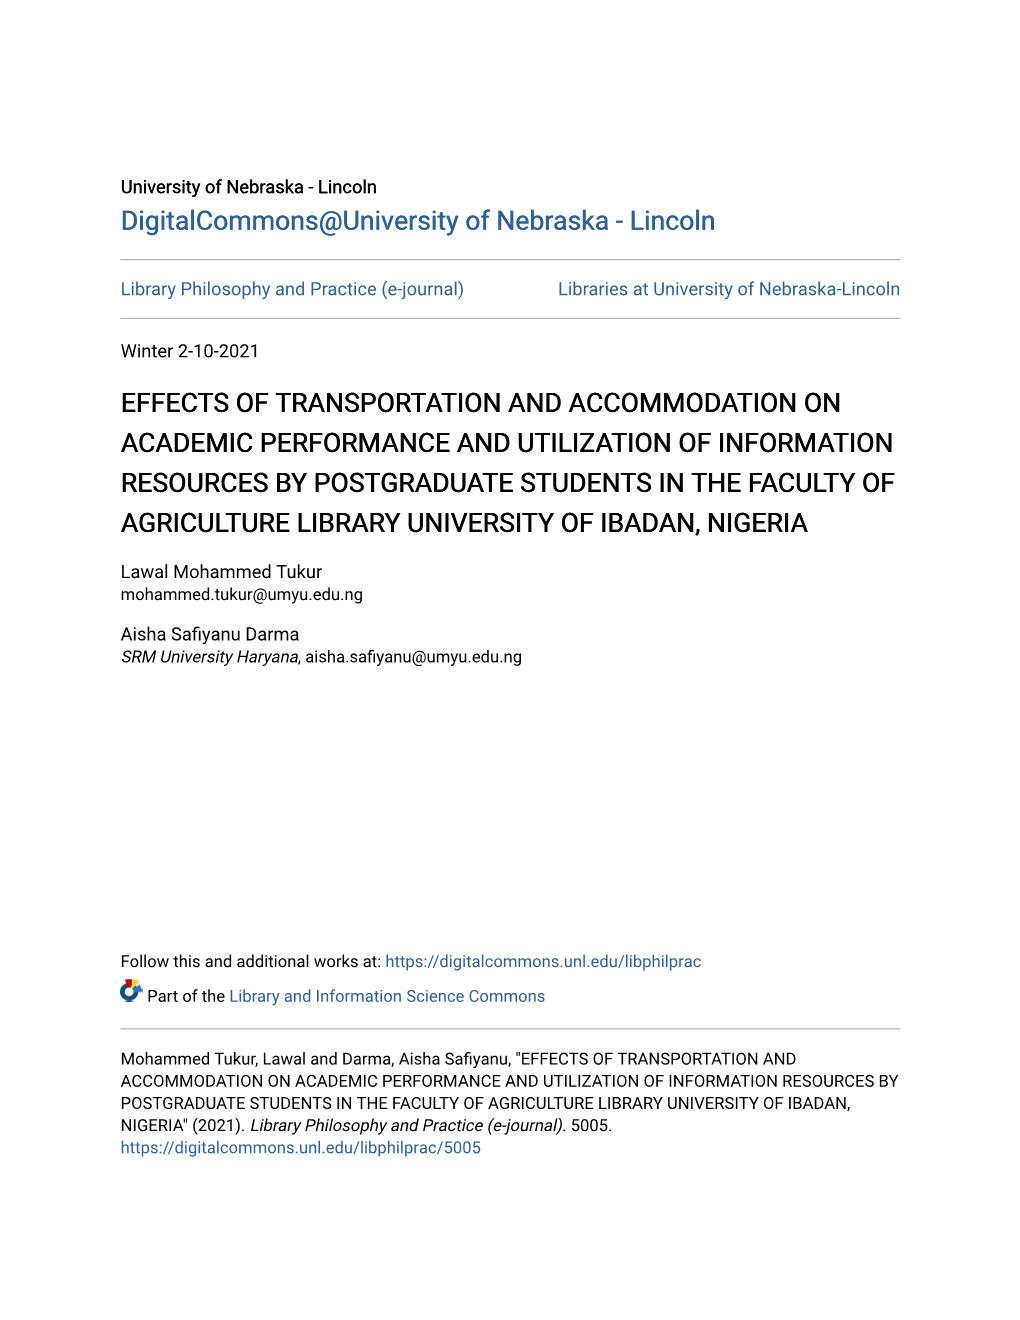 Effects of Transportation and Accommodation On